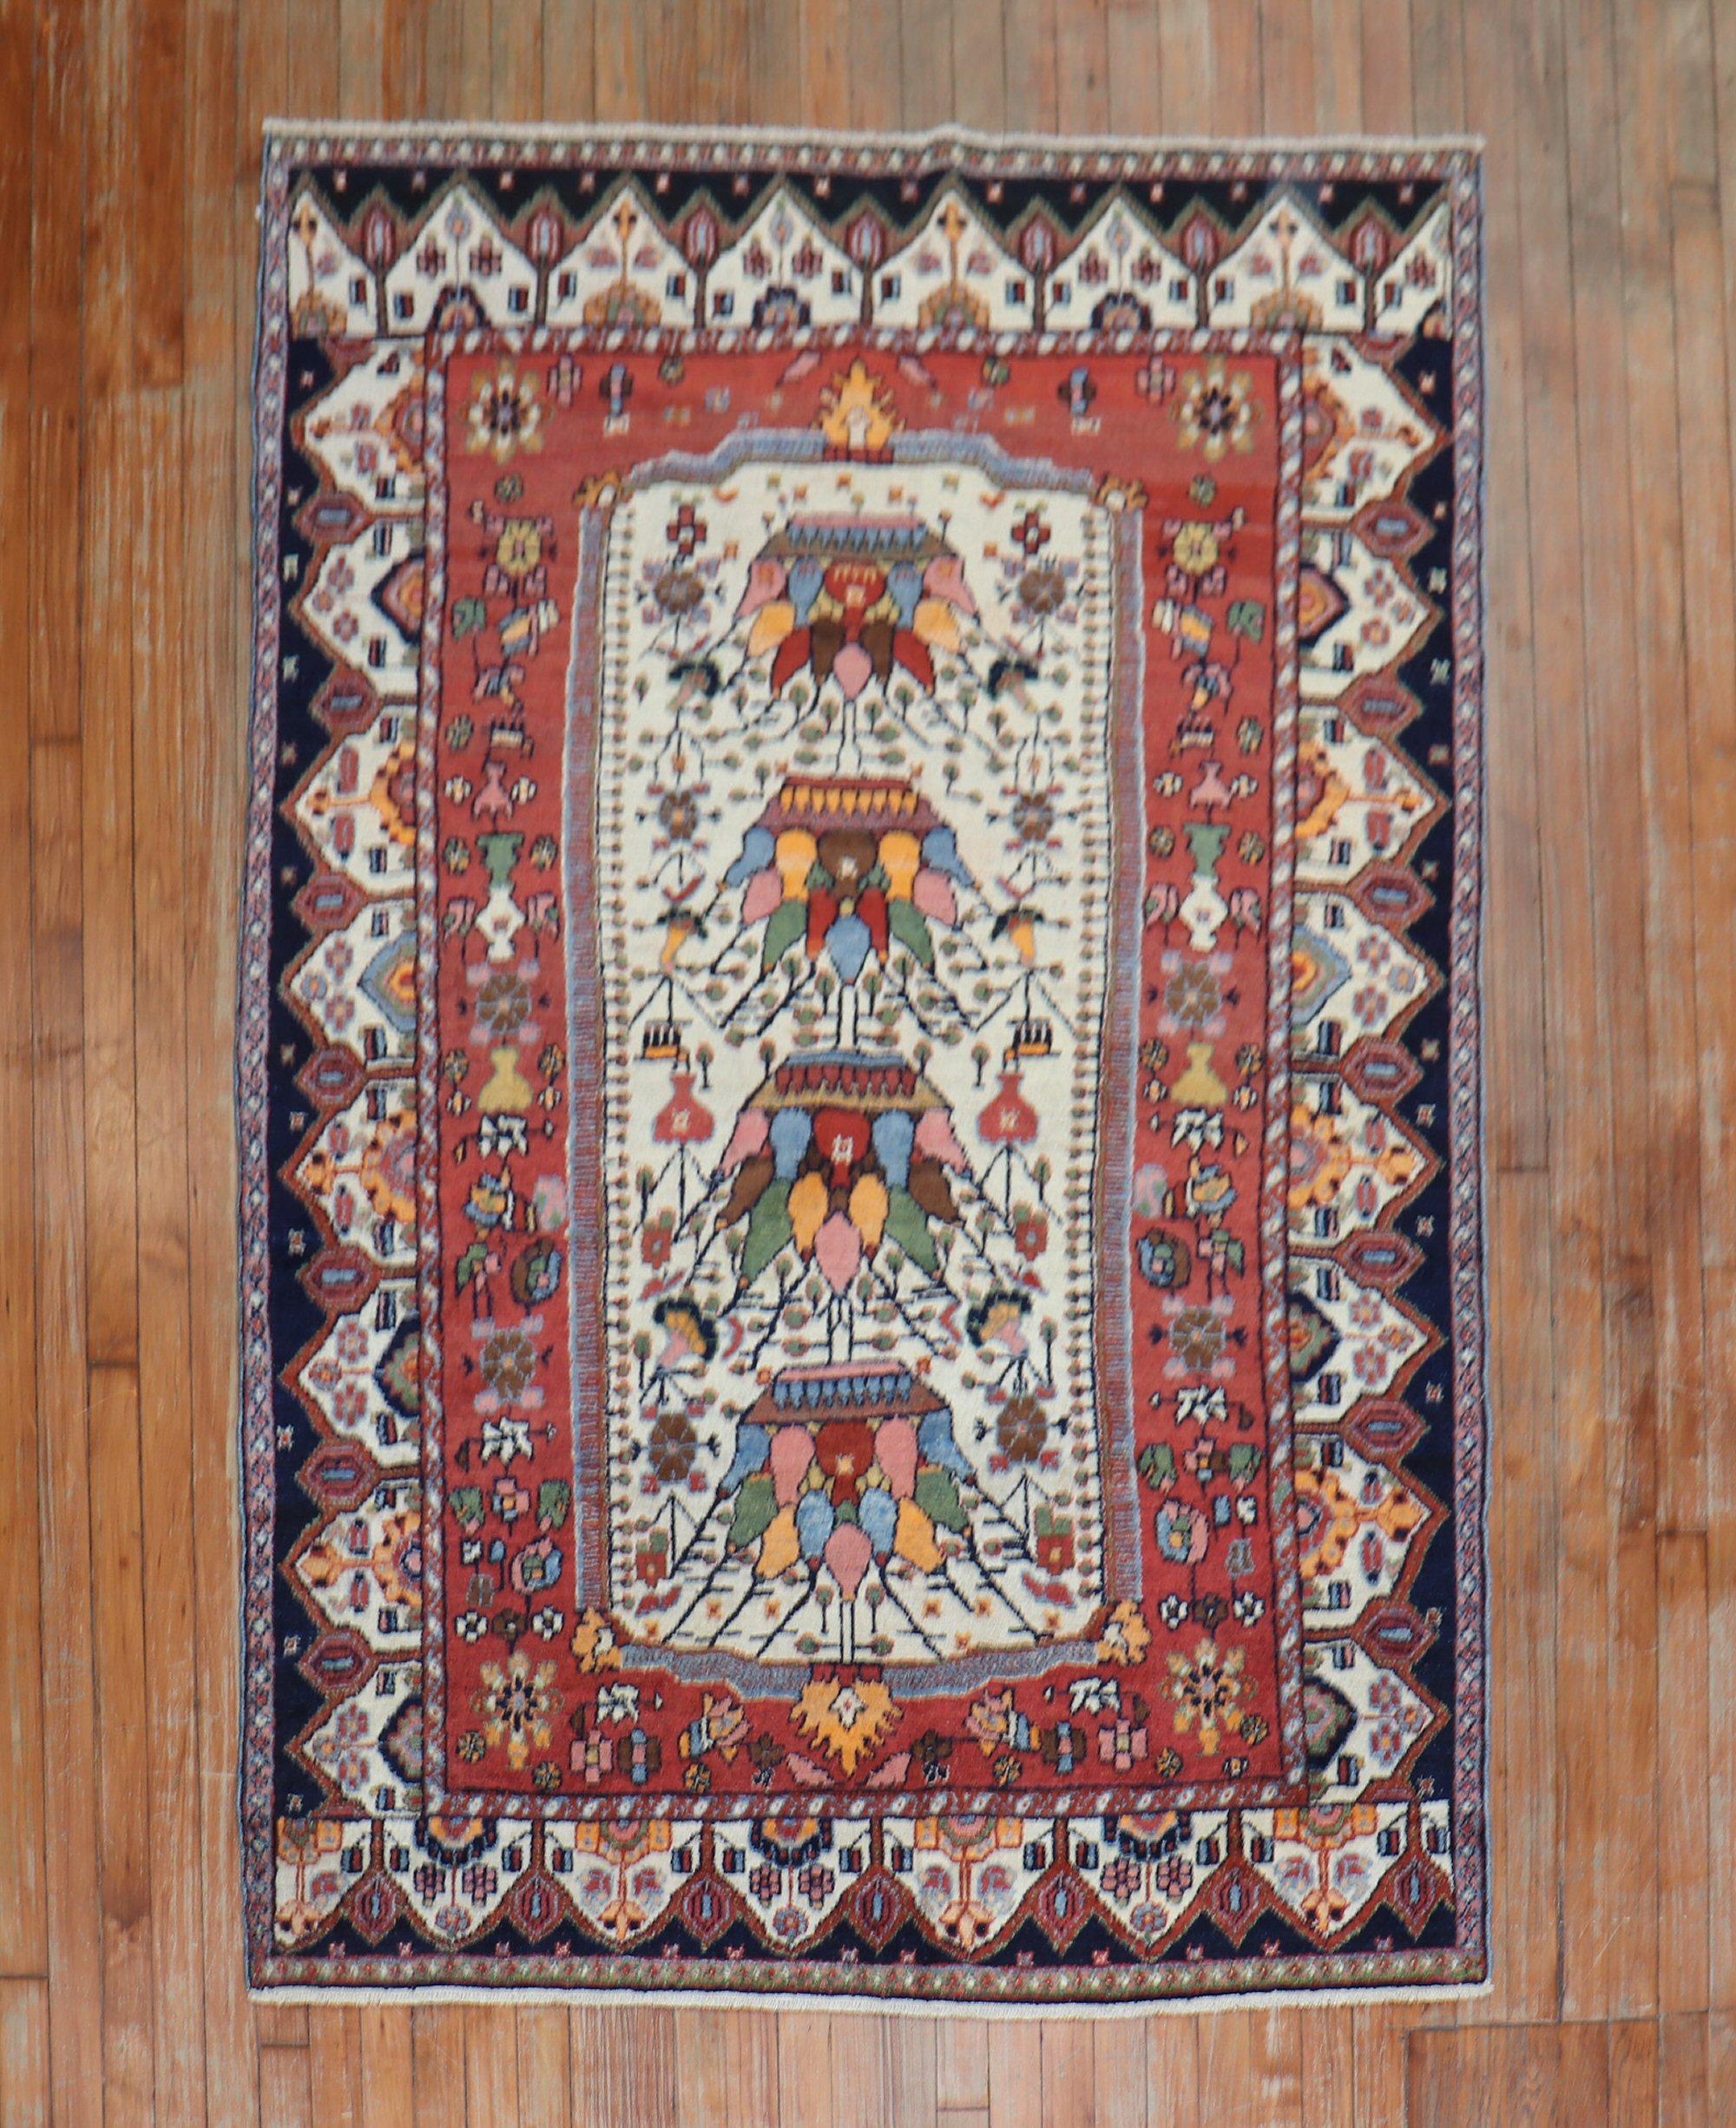 A traditional colorful Persian Bakhtiari accent size rug,

circa 1940. Measures: 4'6